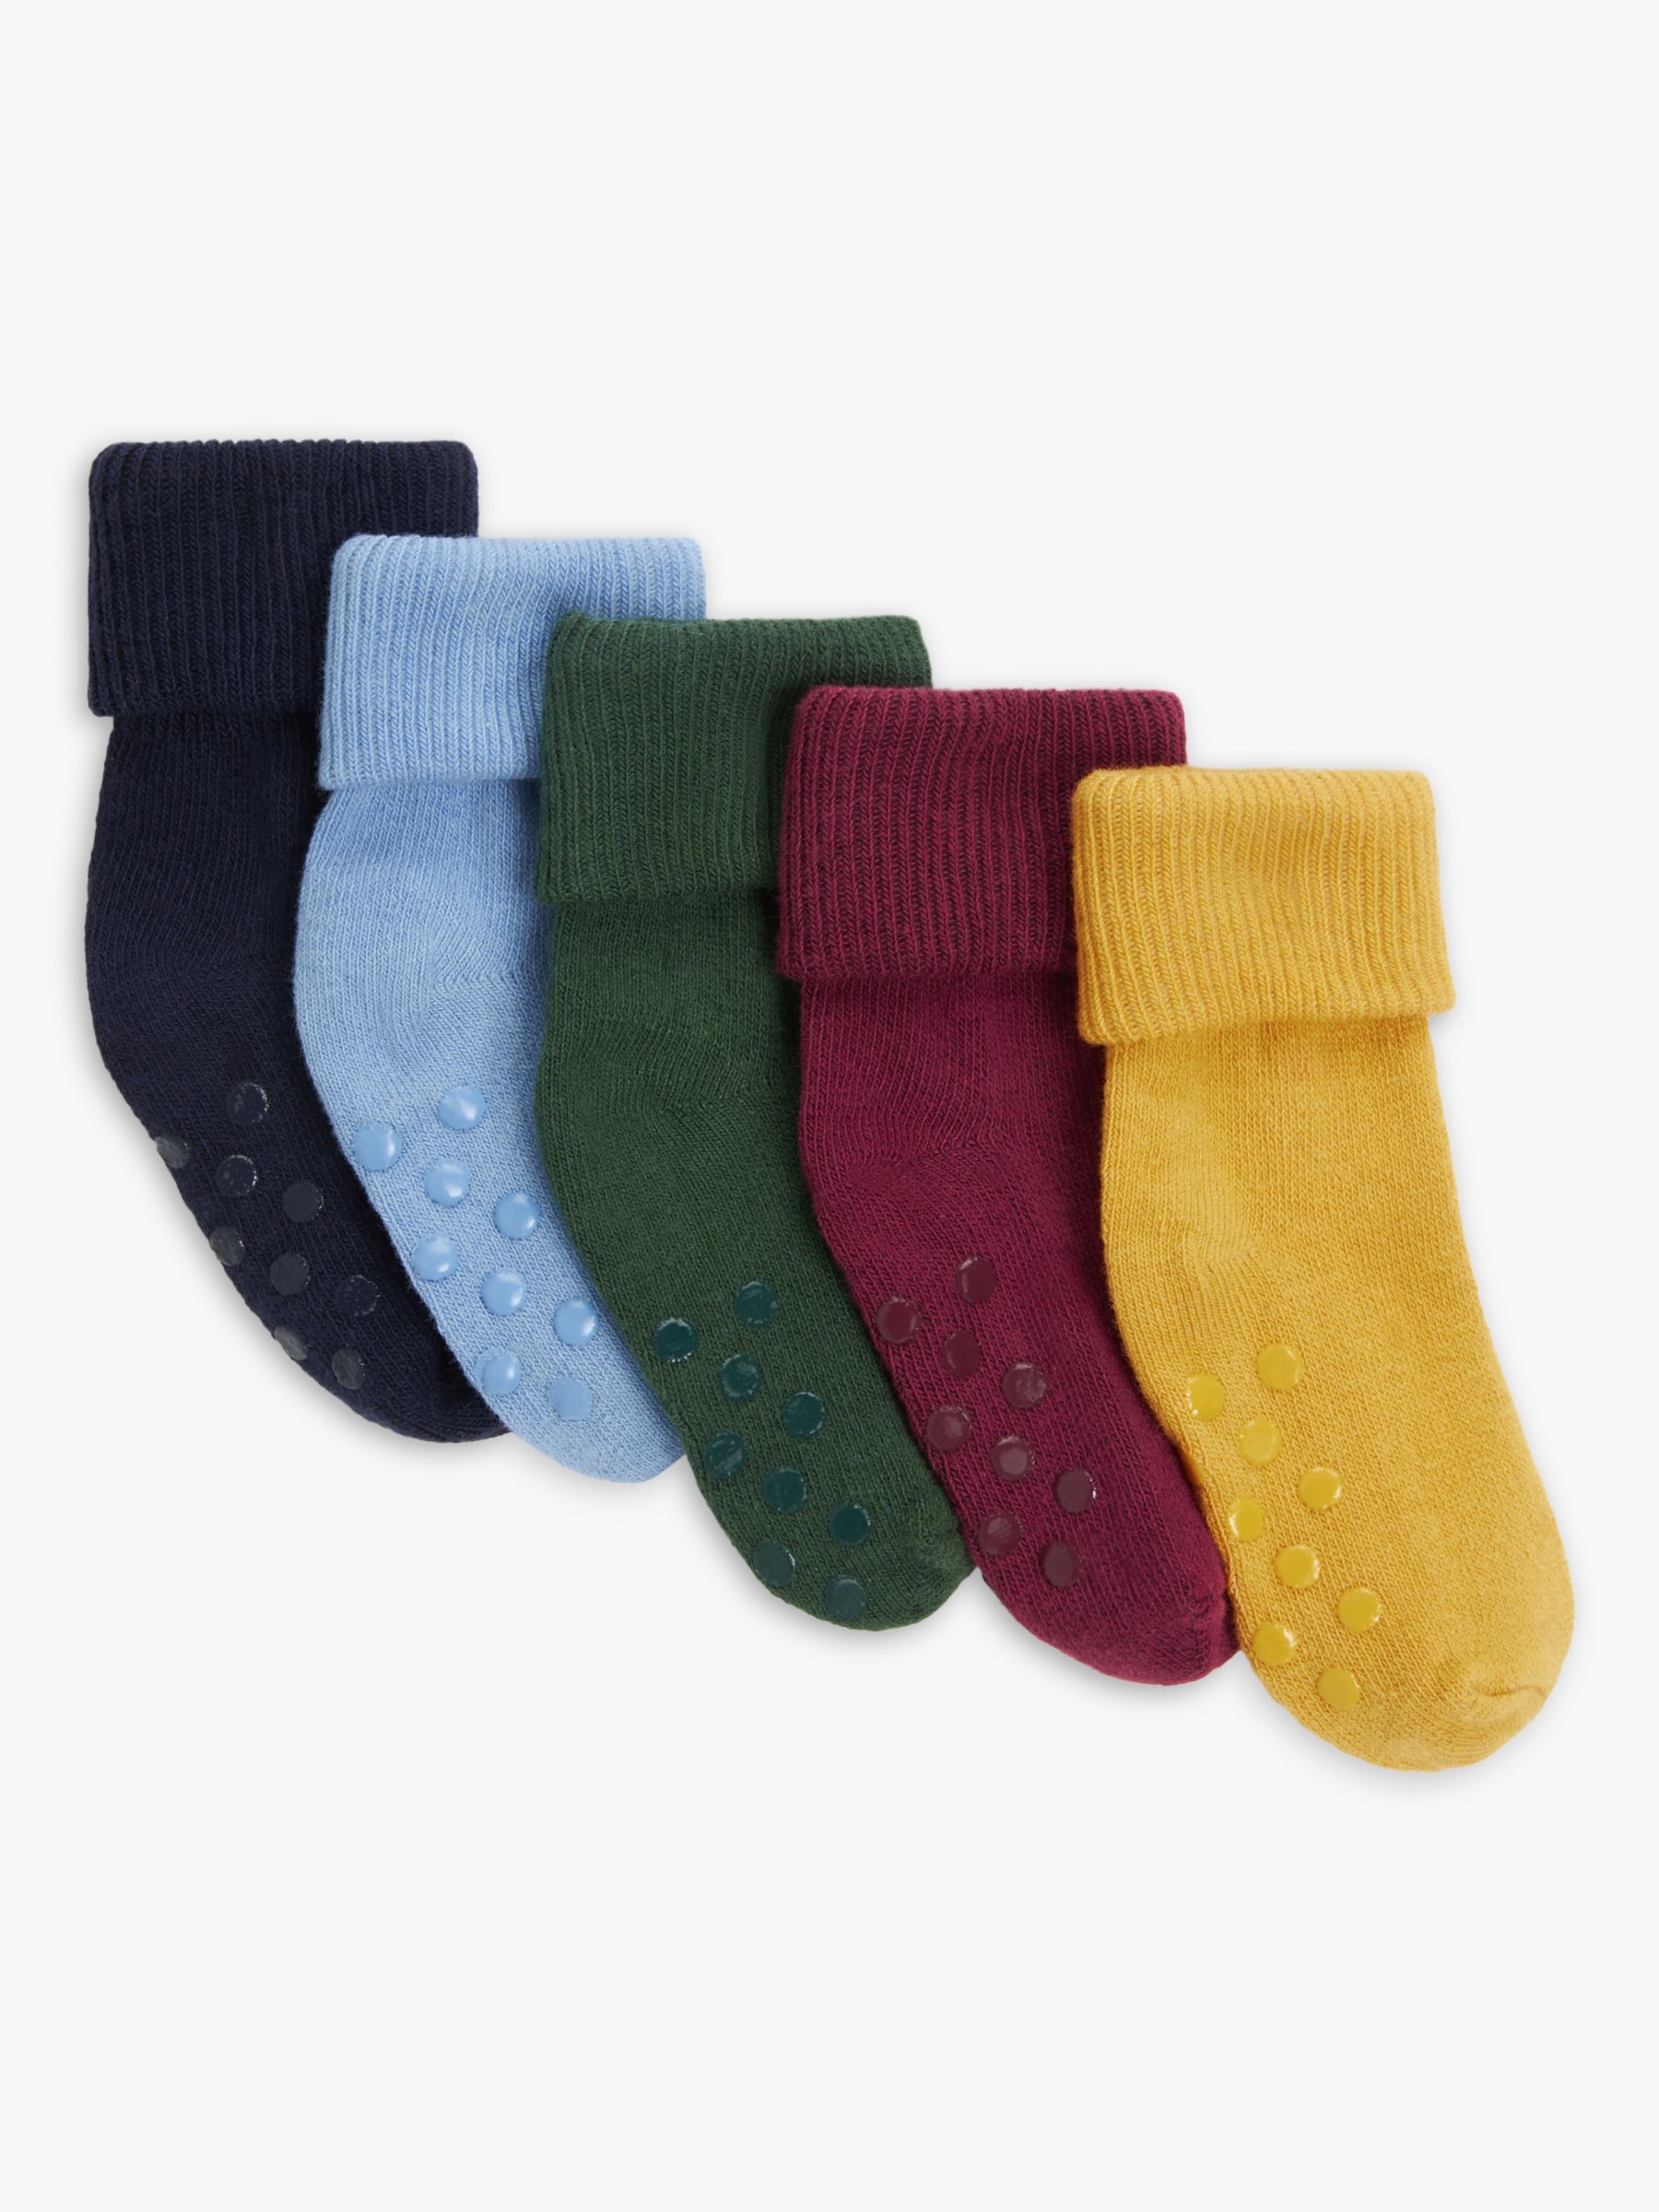 Why Kids Grip Socks Are a Must-Have for Active Children?